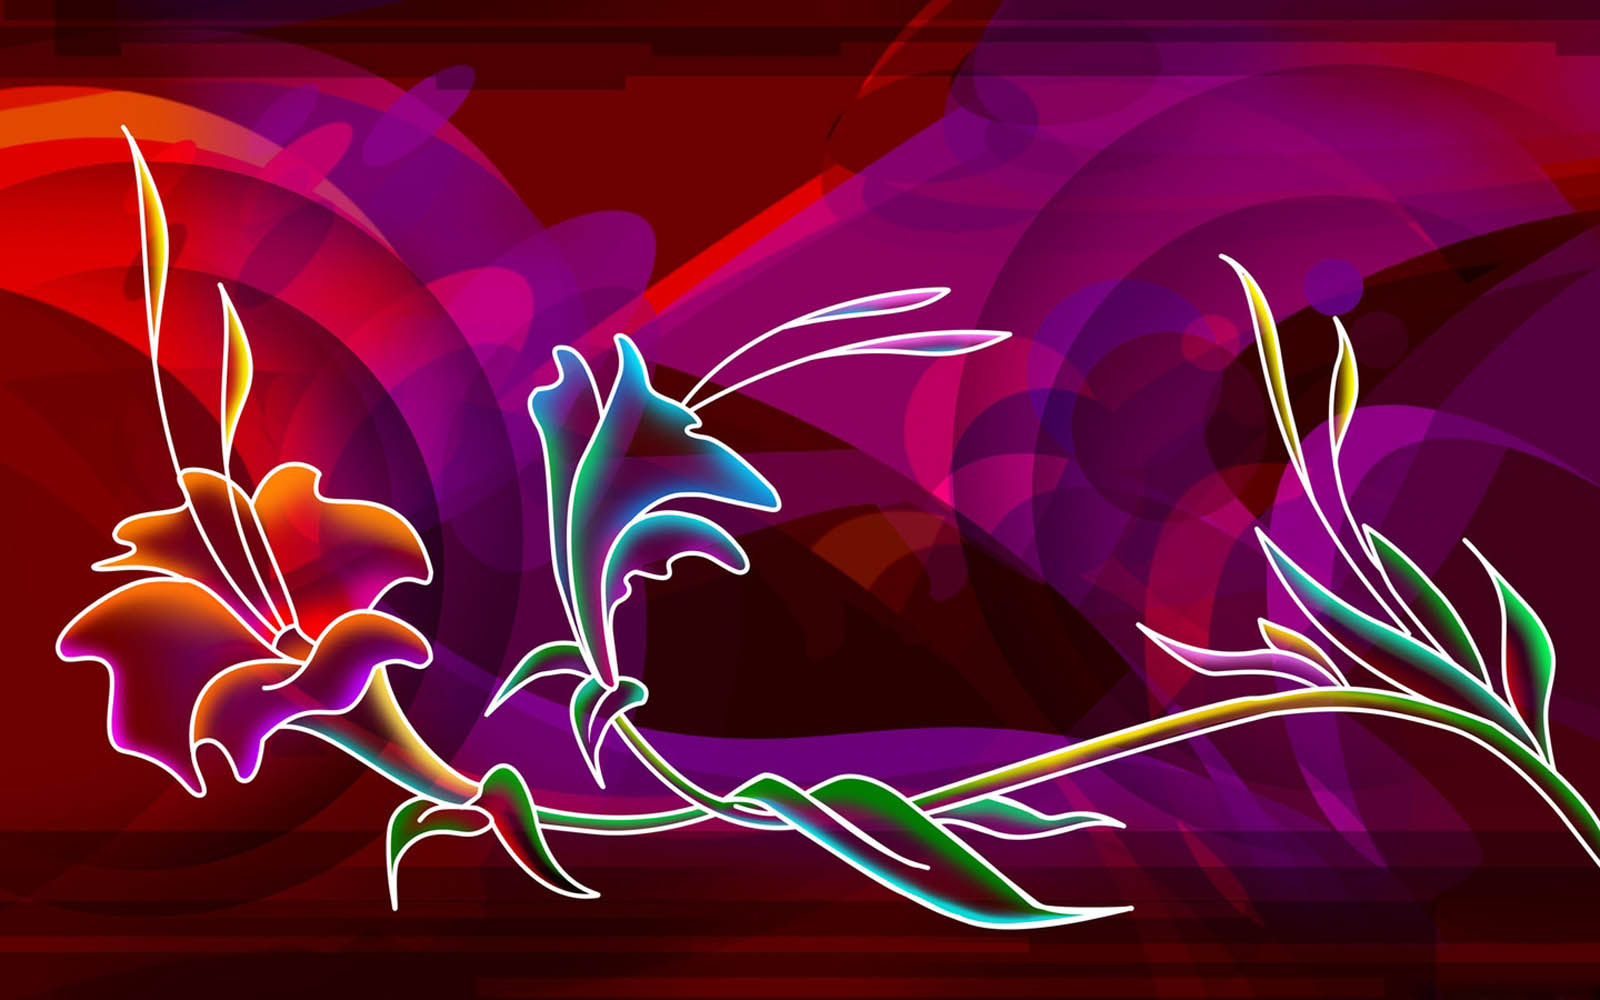 Tag Neon Art Wallpapers Backgrounds Photos Images and Pictures for